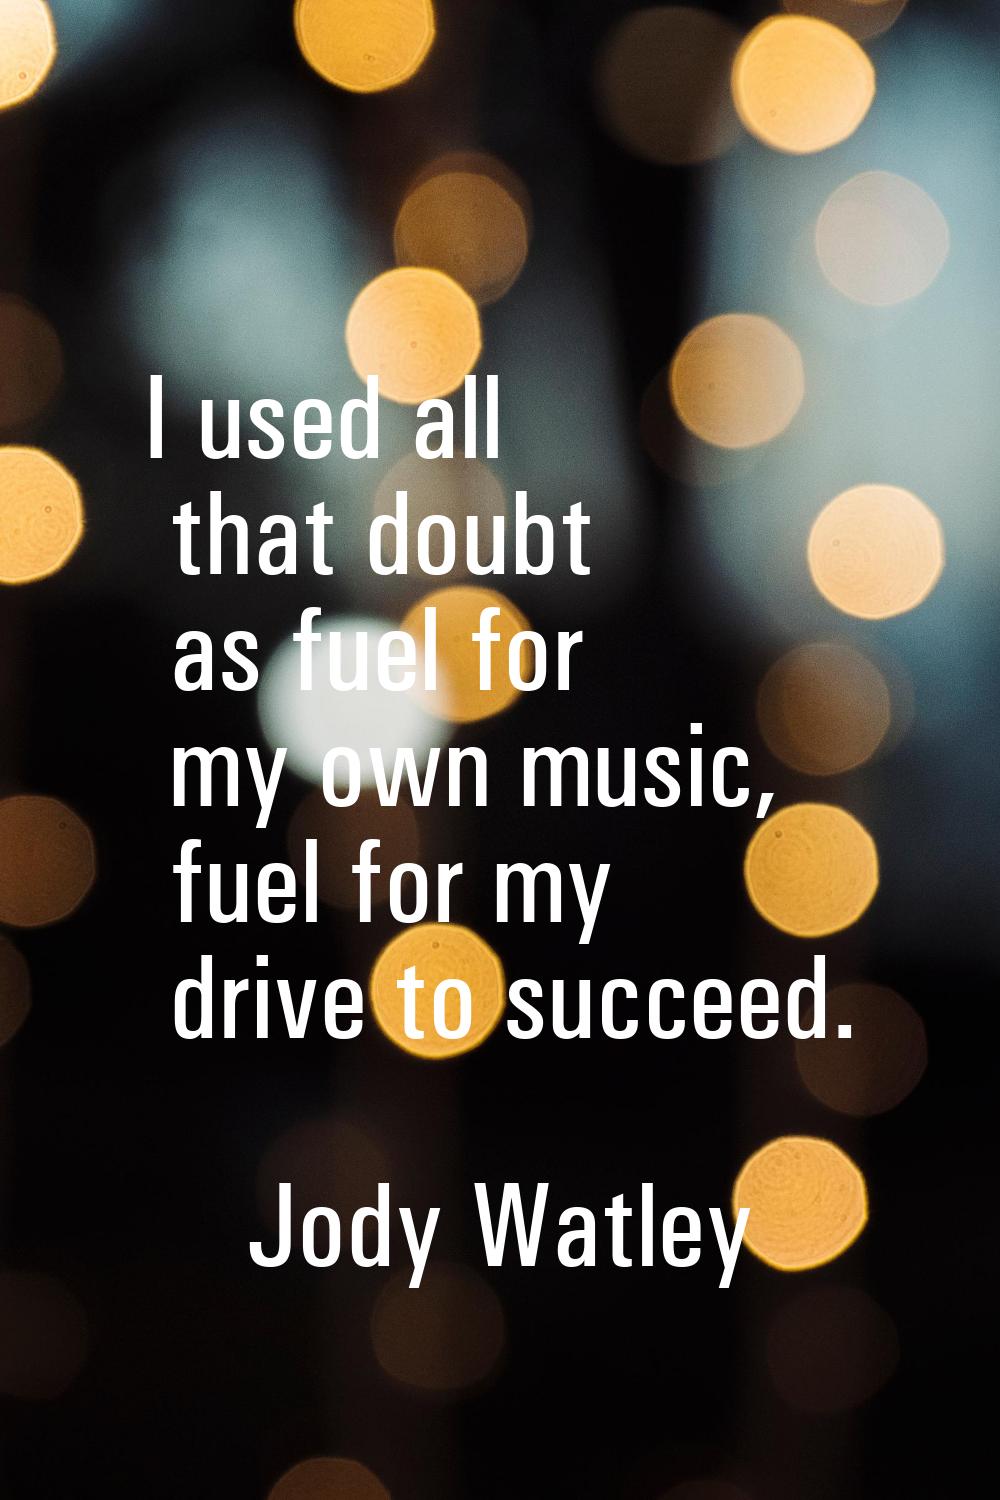 I used all that doubt as fuel for my own music, fuel for my drive to succeed.